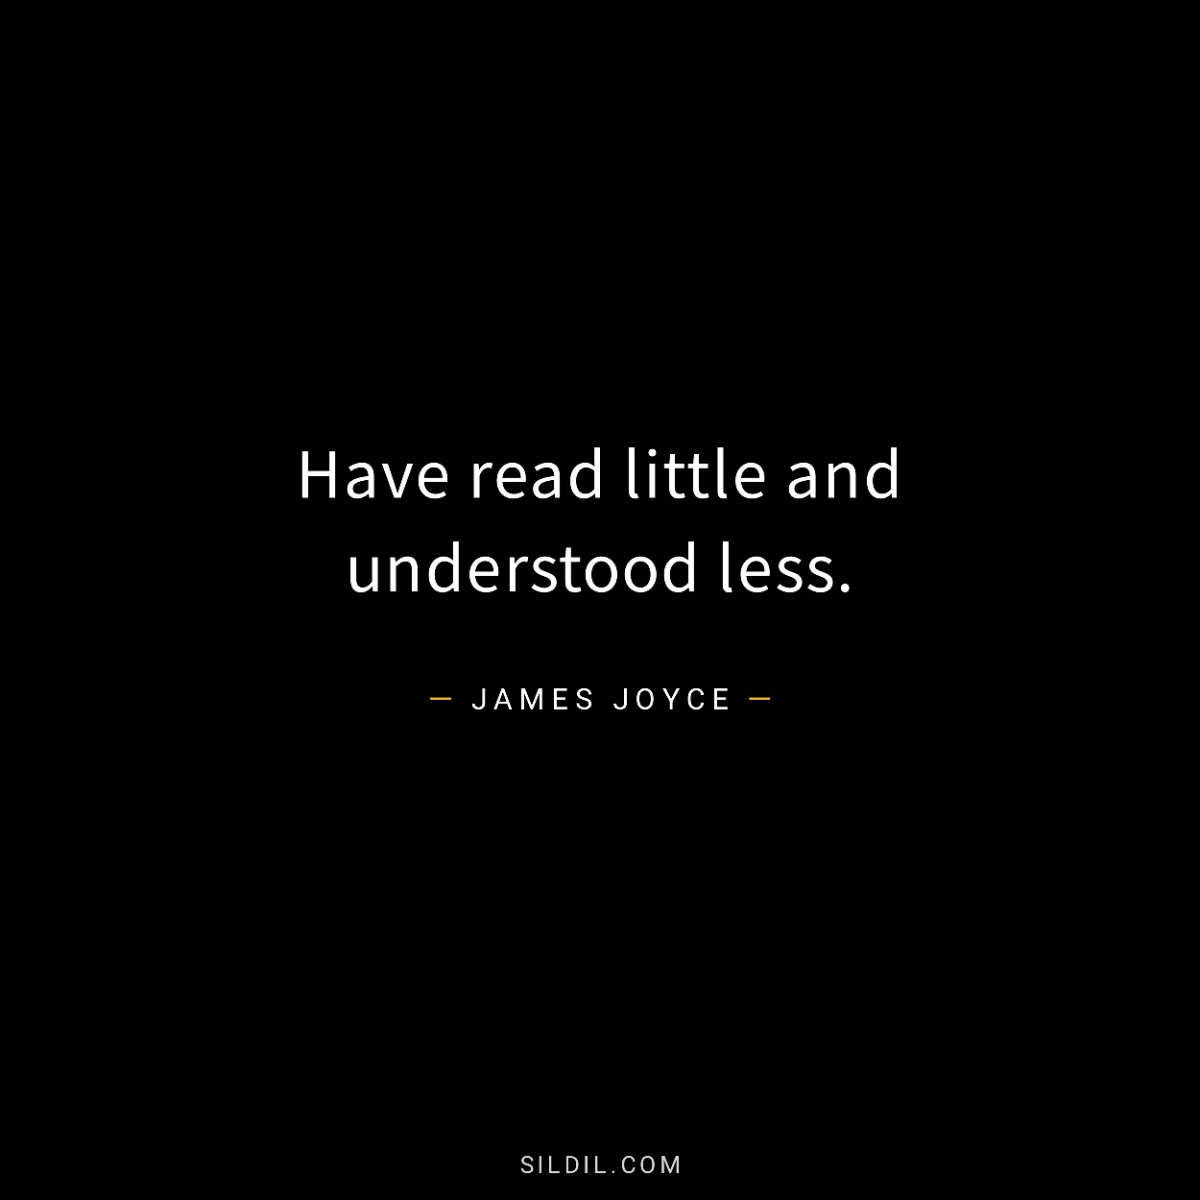 Have read little and understood less.